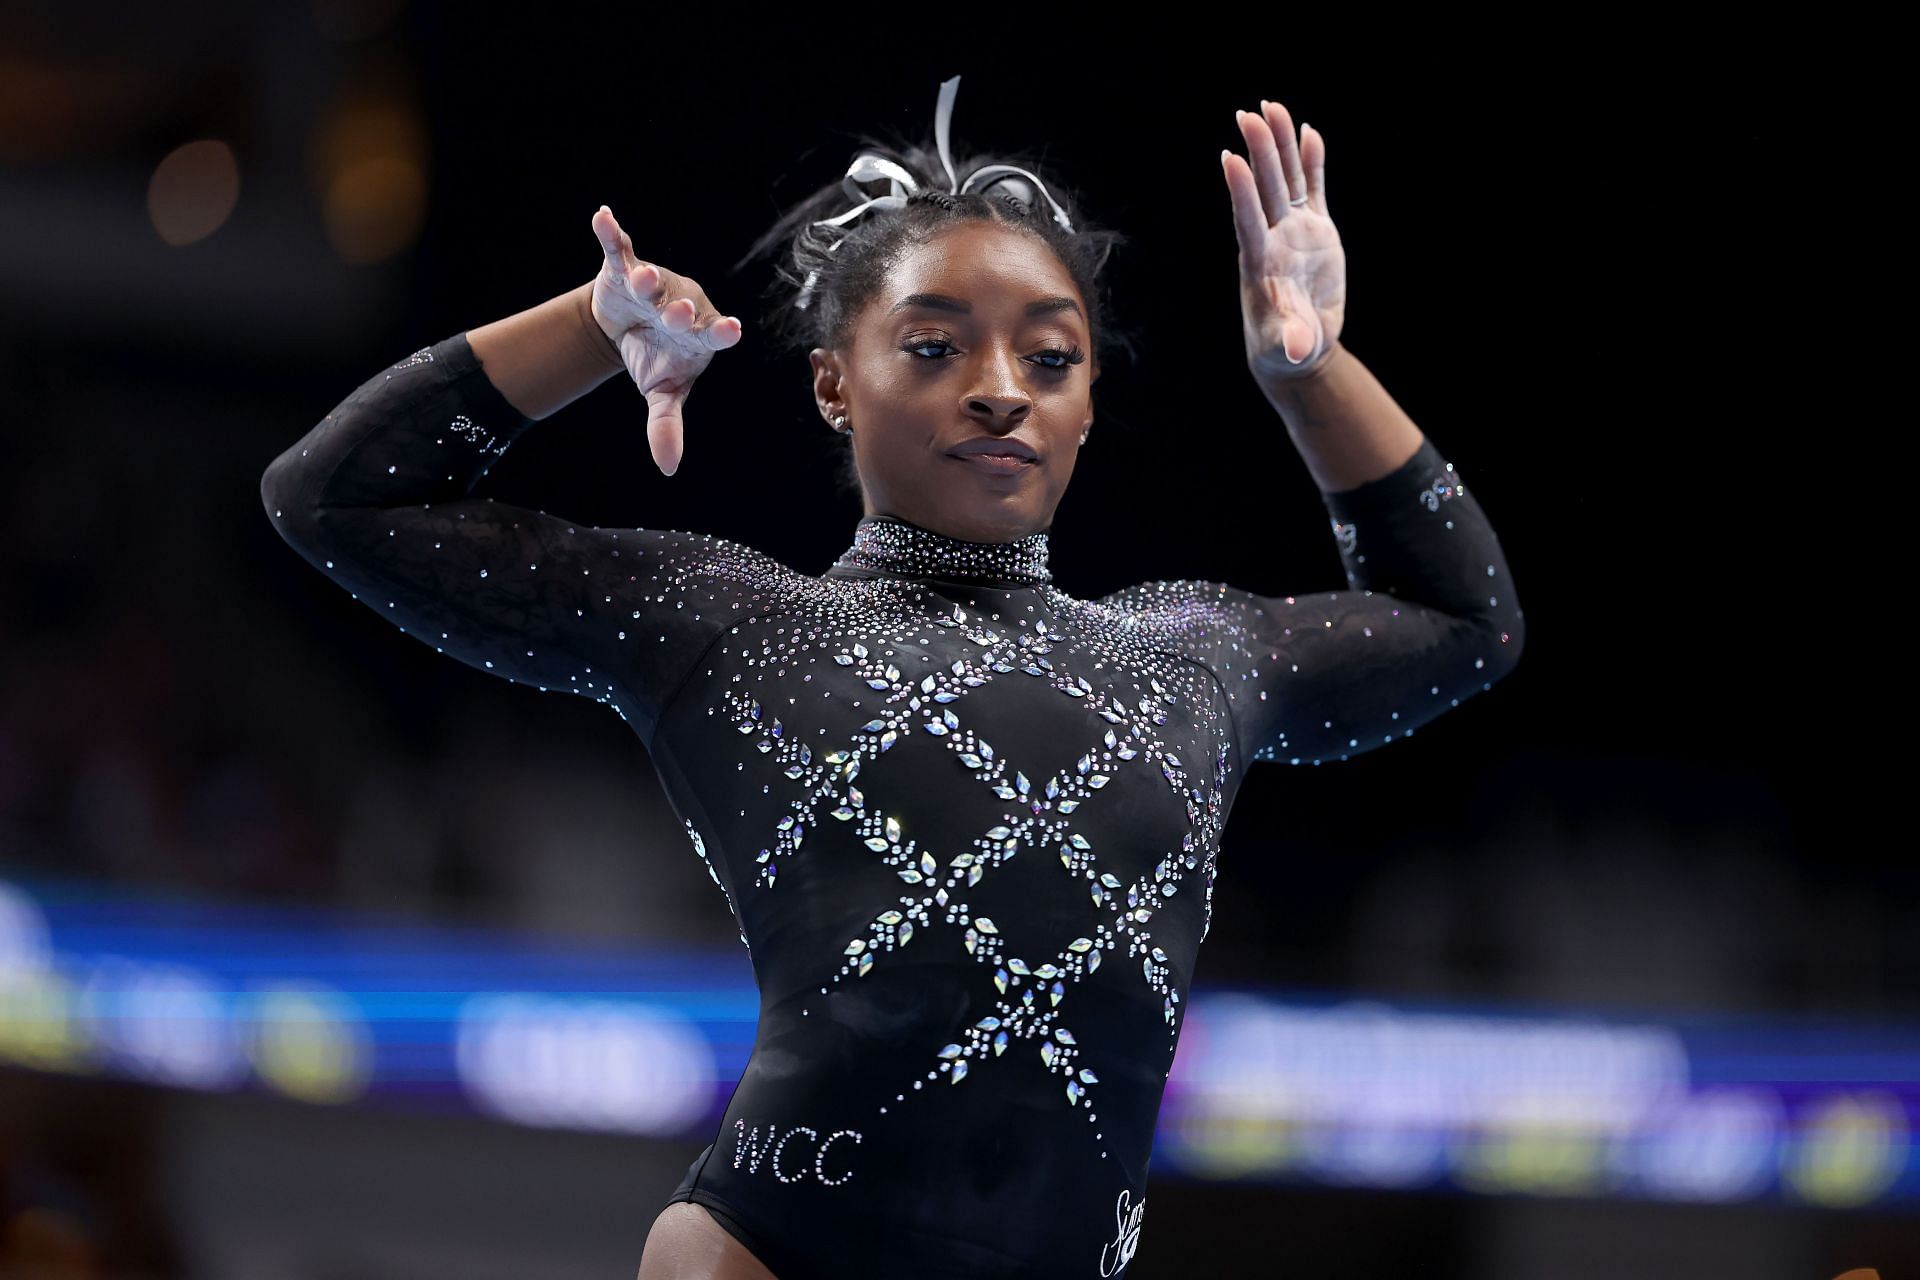 Simone Biles competes in the floor exercise at the 2023 U.S. Gymnastics Championships at the SAP Center in San Jose, California